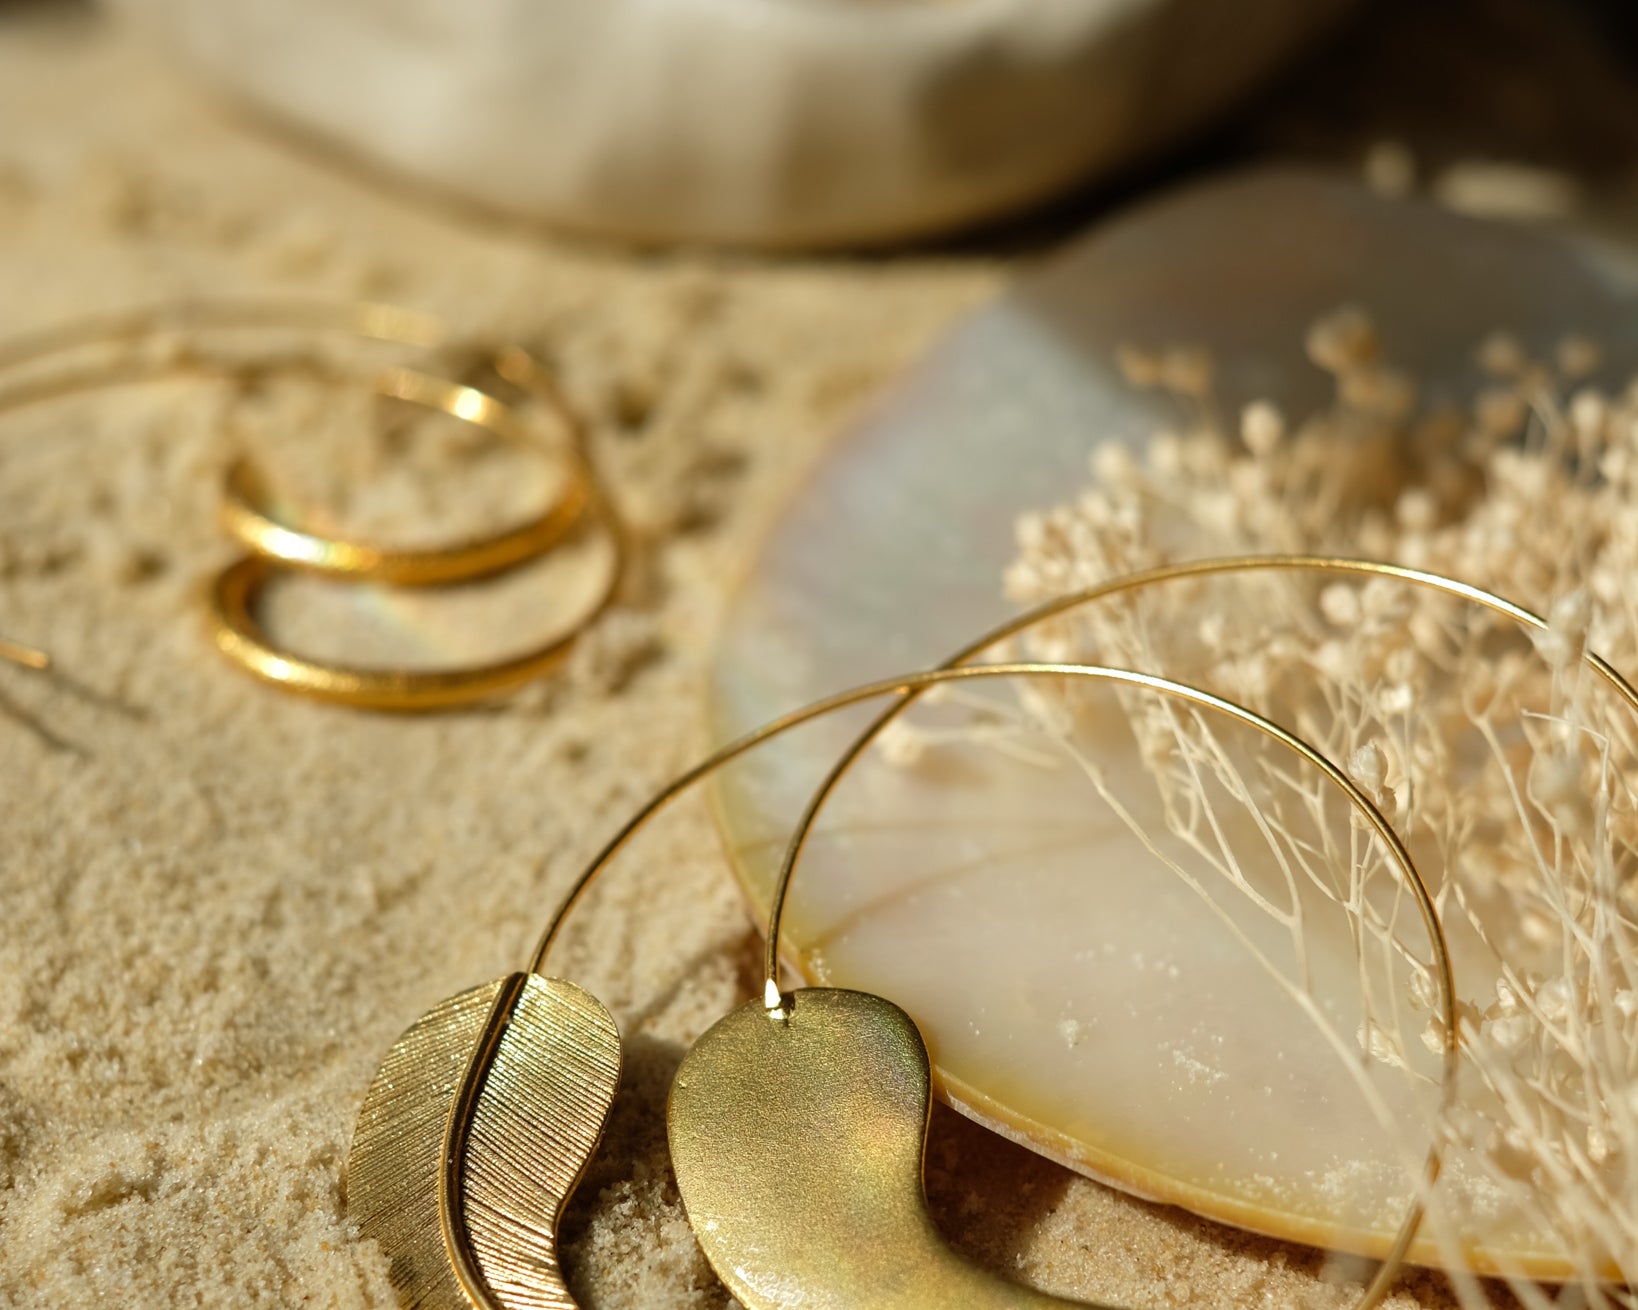 Gold Feather Pull Through Hoop Earrings | Sustainable Jewellery by Ottoman Hands